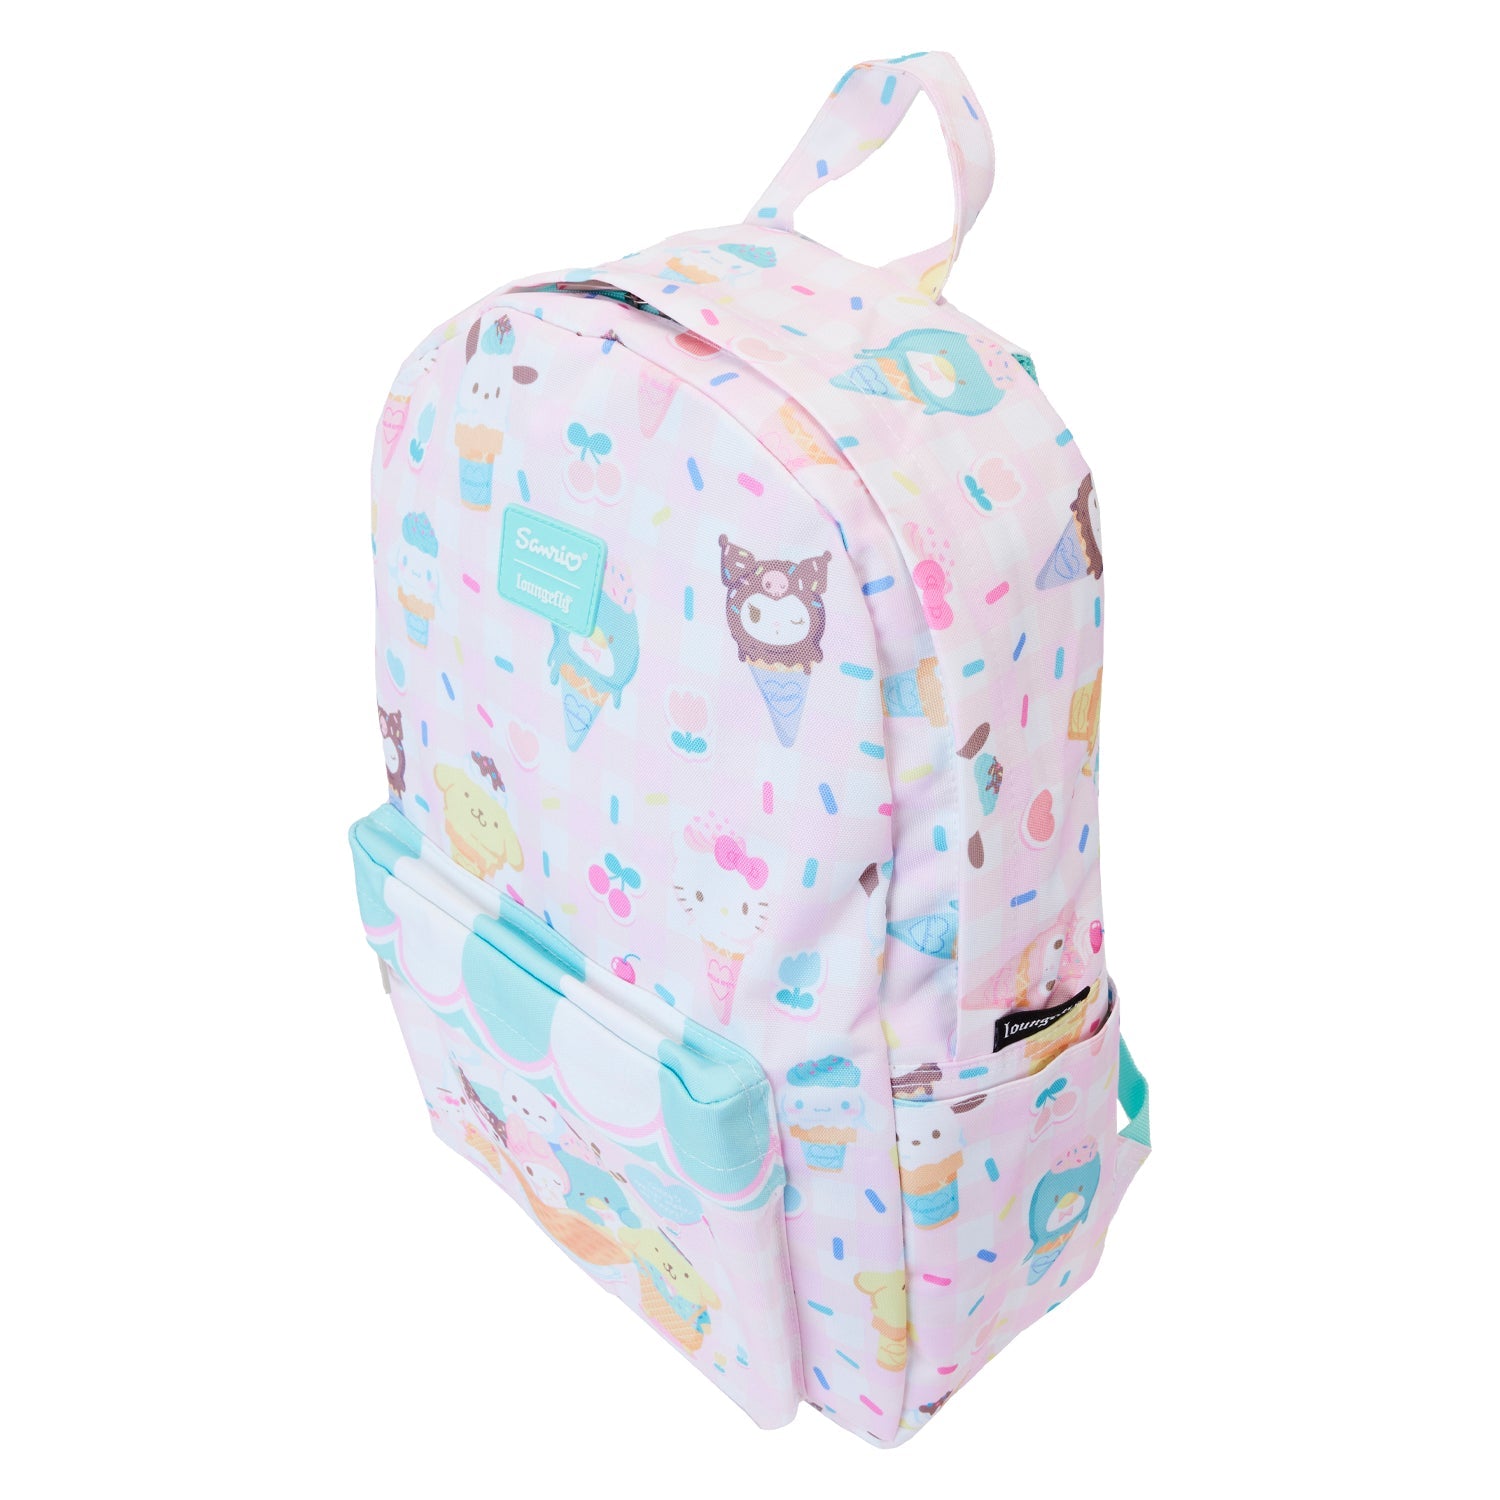 Loungefly x Hello Kitty Full - Size Nylon Backpack - GeekCore